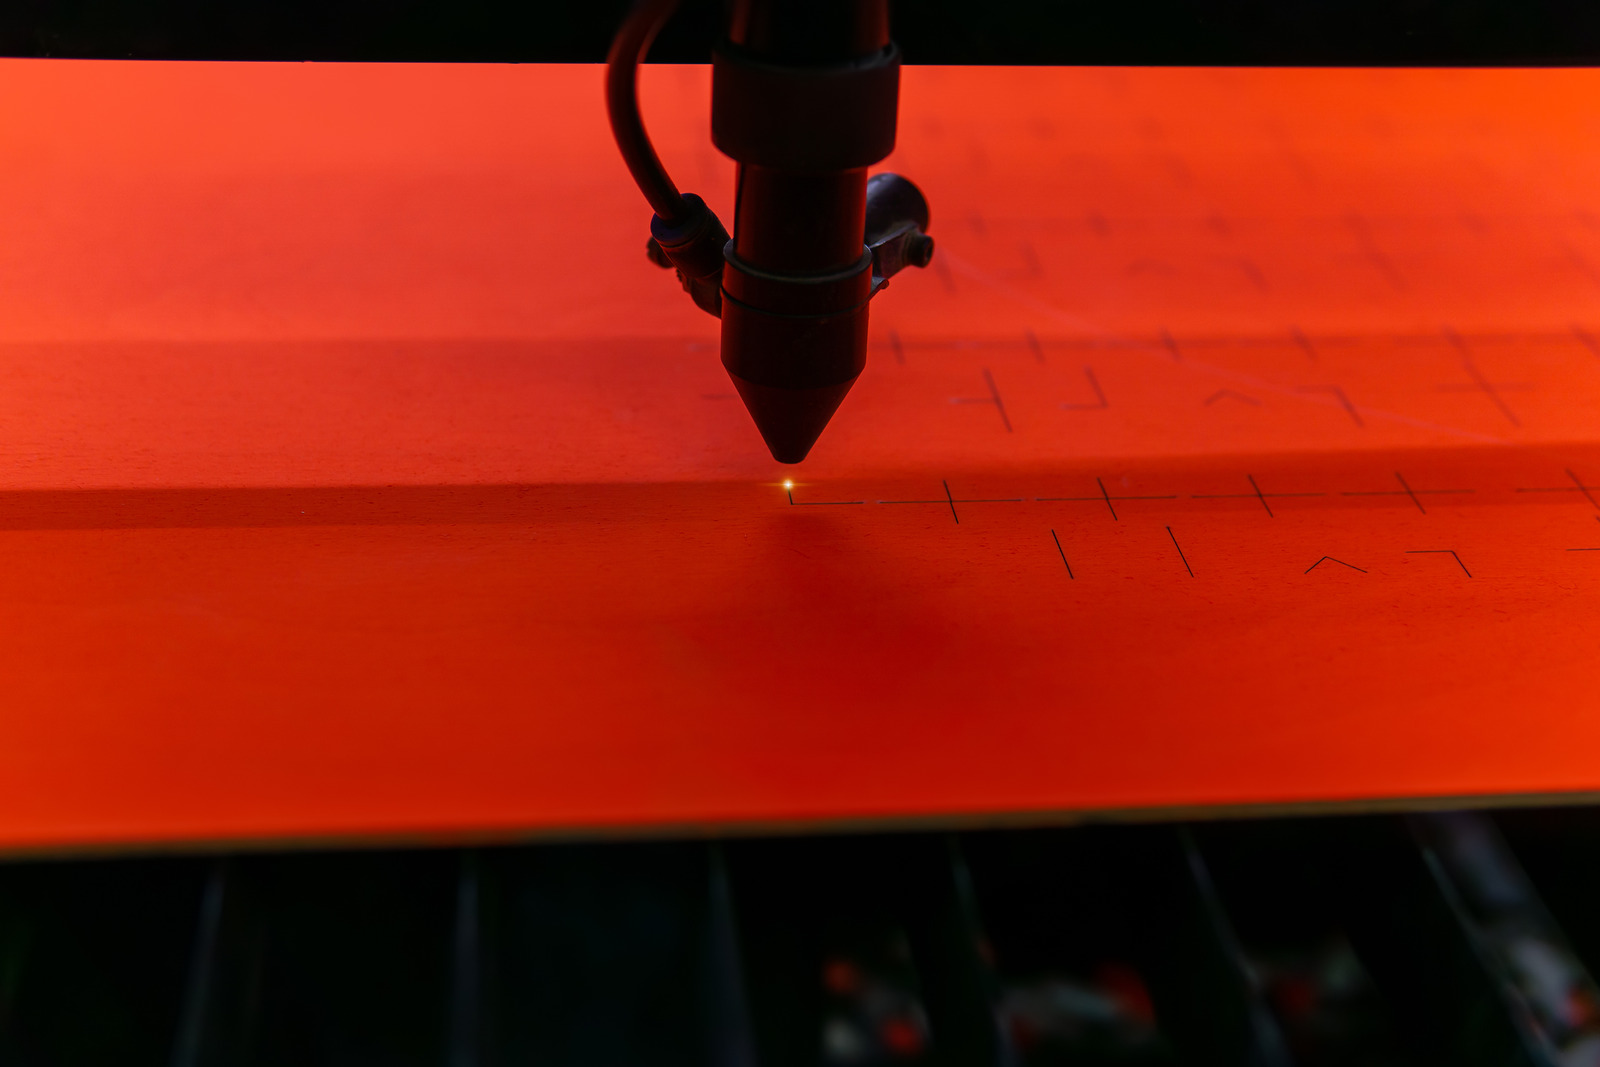 Understanding the Pros and Cons of Laser Cutting Zinc Coated Steel